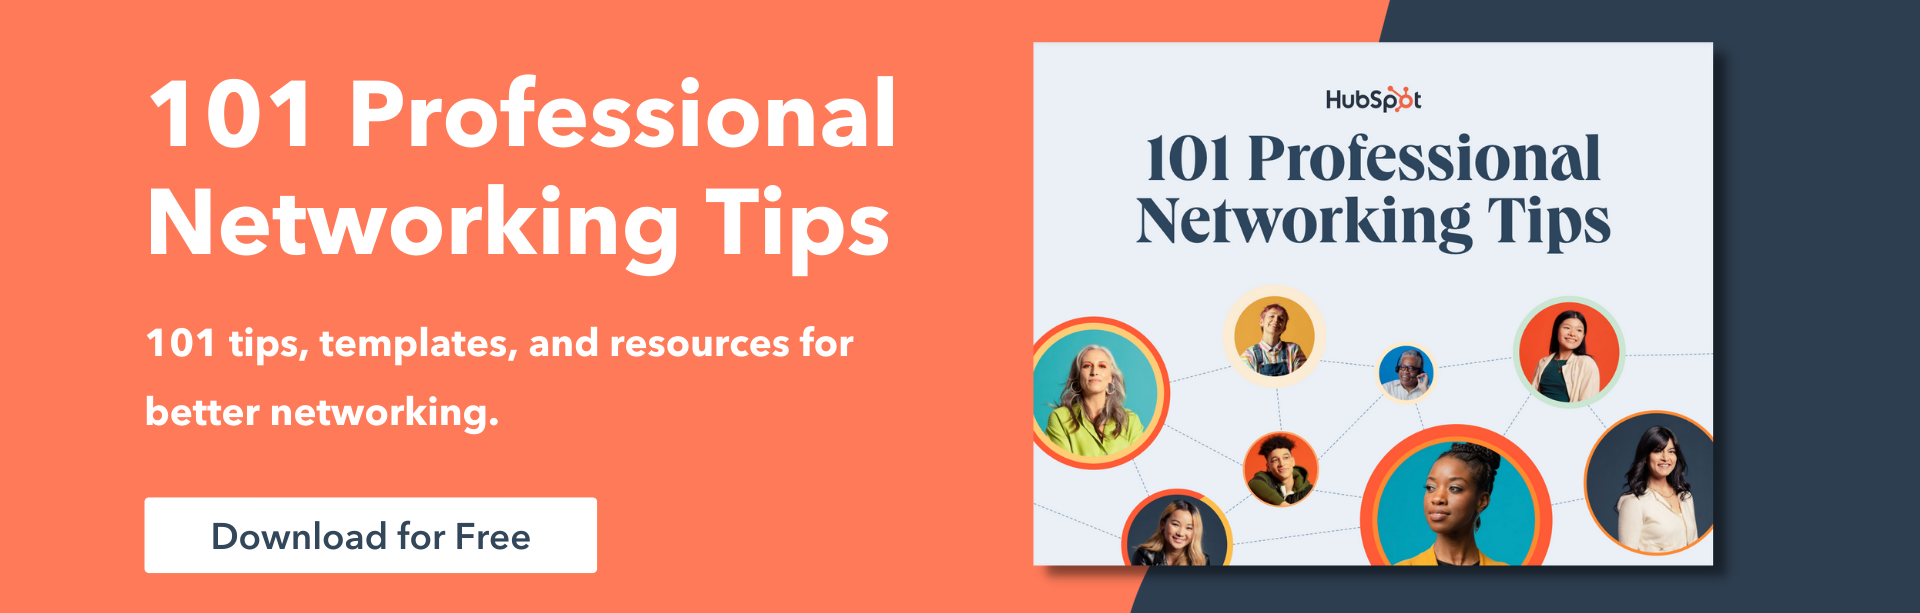 professional networking tips